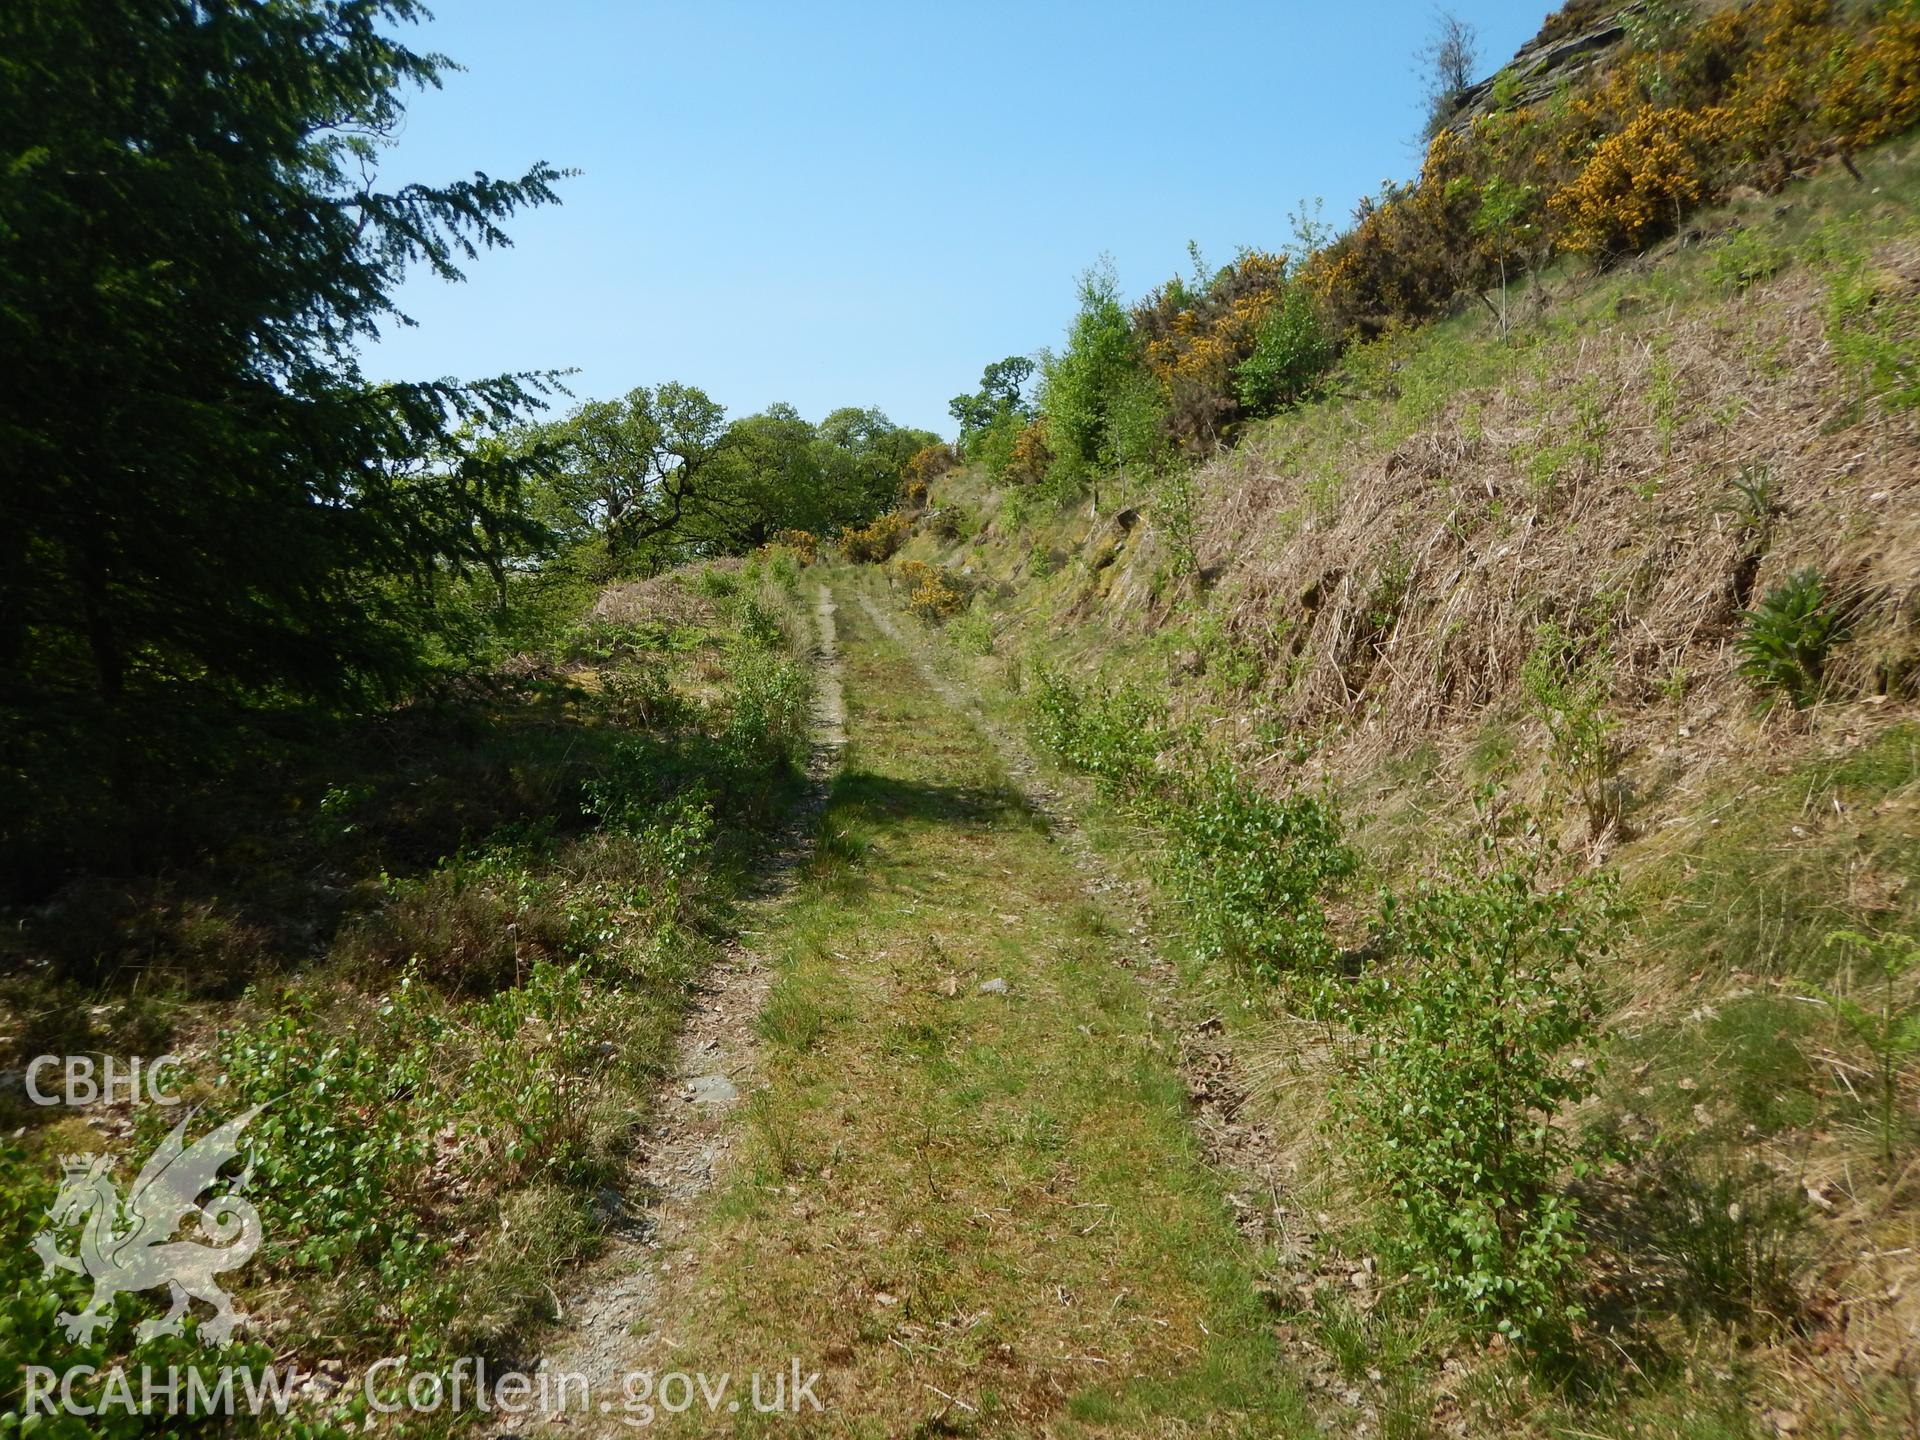 View along forestry track, looking south. Photographed as part of Archaeological Desk Based Assessment of Afon Claerwen, Elan Valley, Rhayader, Powys. Assessment conducted by Archaeology Wales in 2018. Report no. 1681. Project no. 2573.